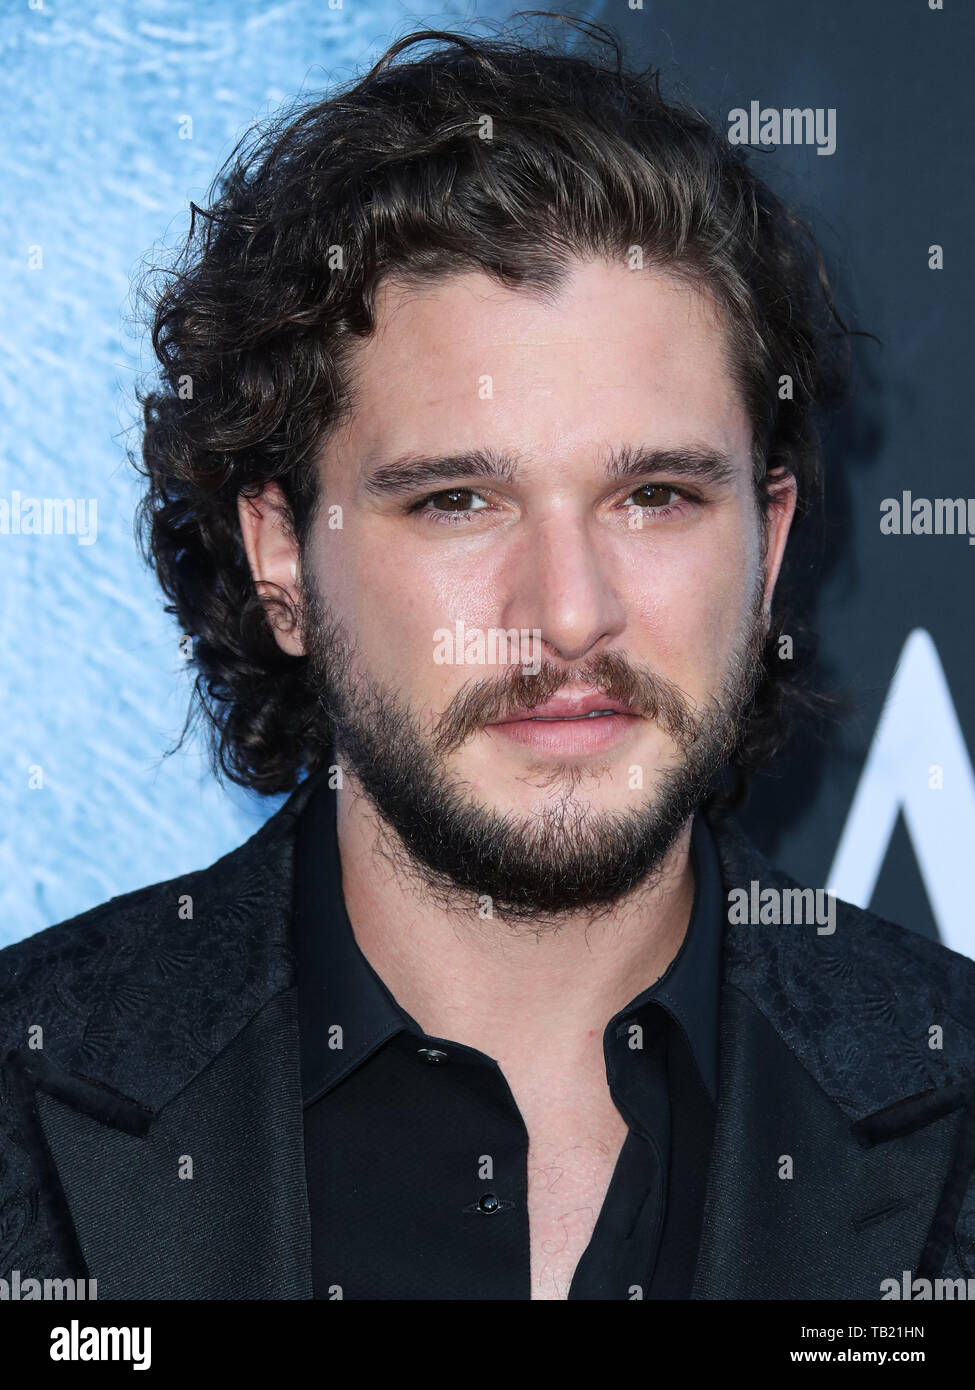 Los Angeles, United States. 12th July, 2017. (FILE) Kit Harington Checks Into Rehab for Stress and Alcohol. LOS ANGELES, CALIFORNIA, USA - JULY 12: Actor Kit Harington wearing Dolce and Gabbana arrives at the Los Angeles Premiere Of HBO's 'Game Of Thrones' Season 7 held at the Walt Disney Concert Hall on July 12, 2017 in Los Angeles, California, United States. (Photo by Xavier Collin/Image Press Agency) Credit: Image Press Agency/Alamy Live News Stock Photo